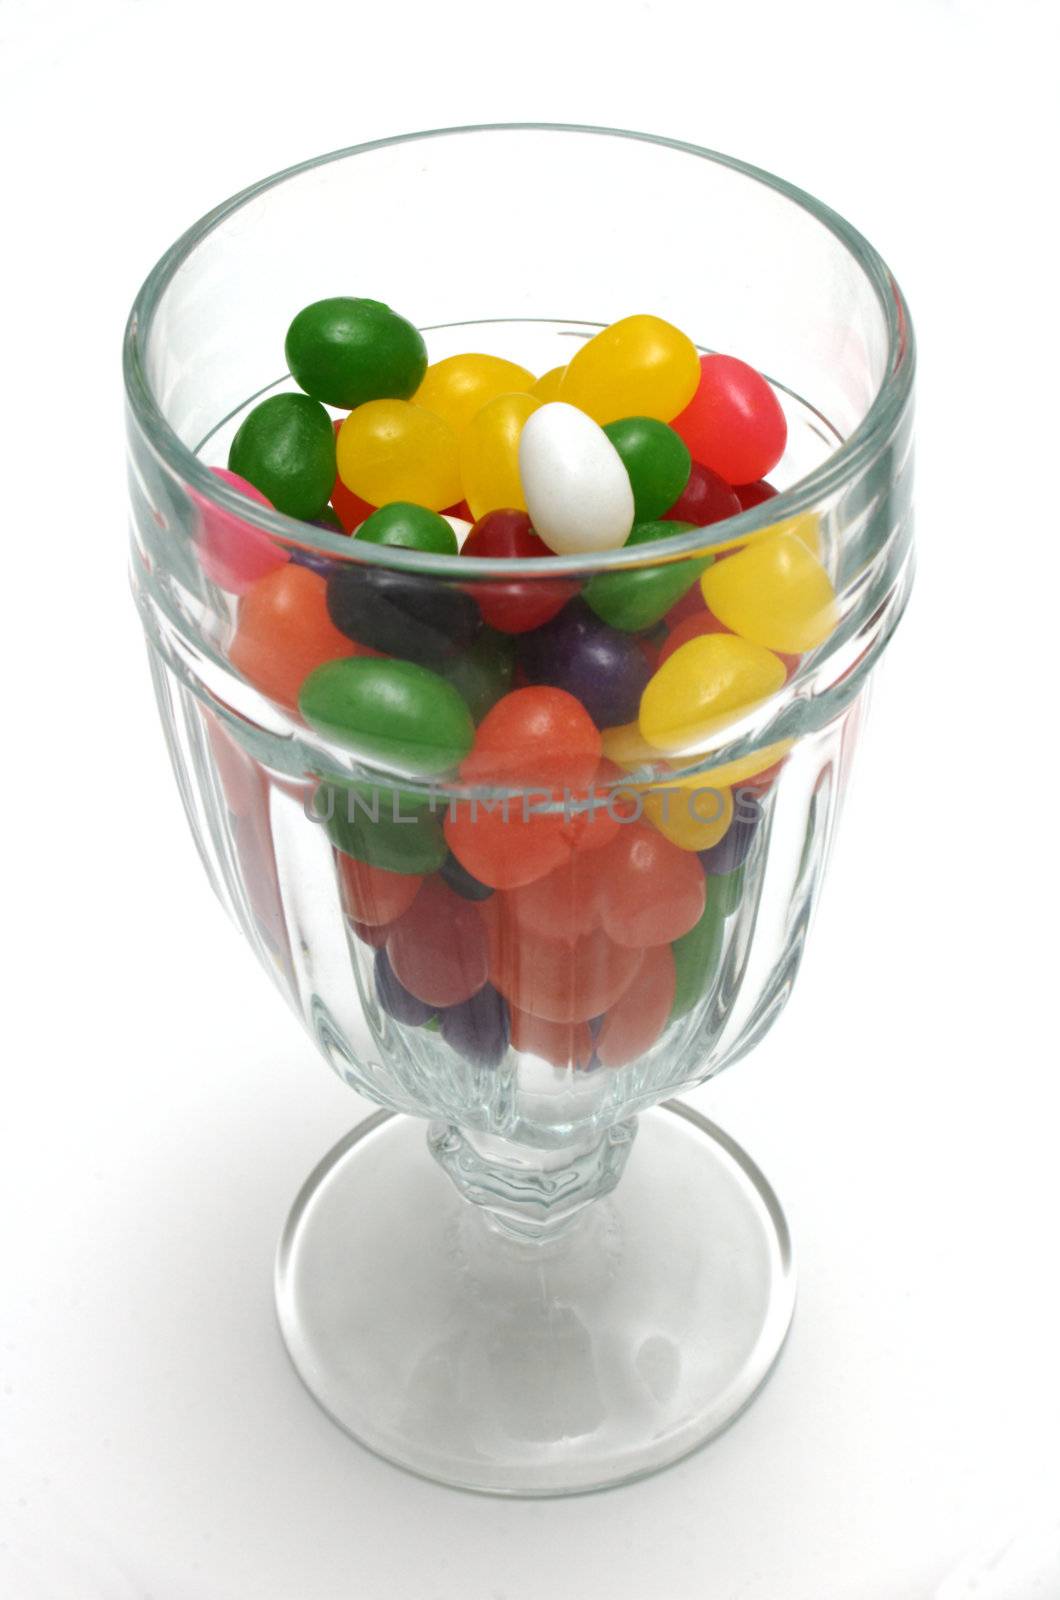 Jelly beans in glass sundae cup by paulglover